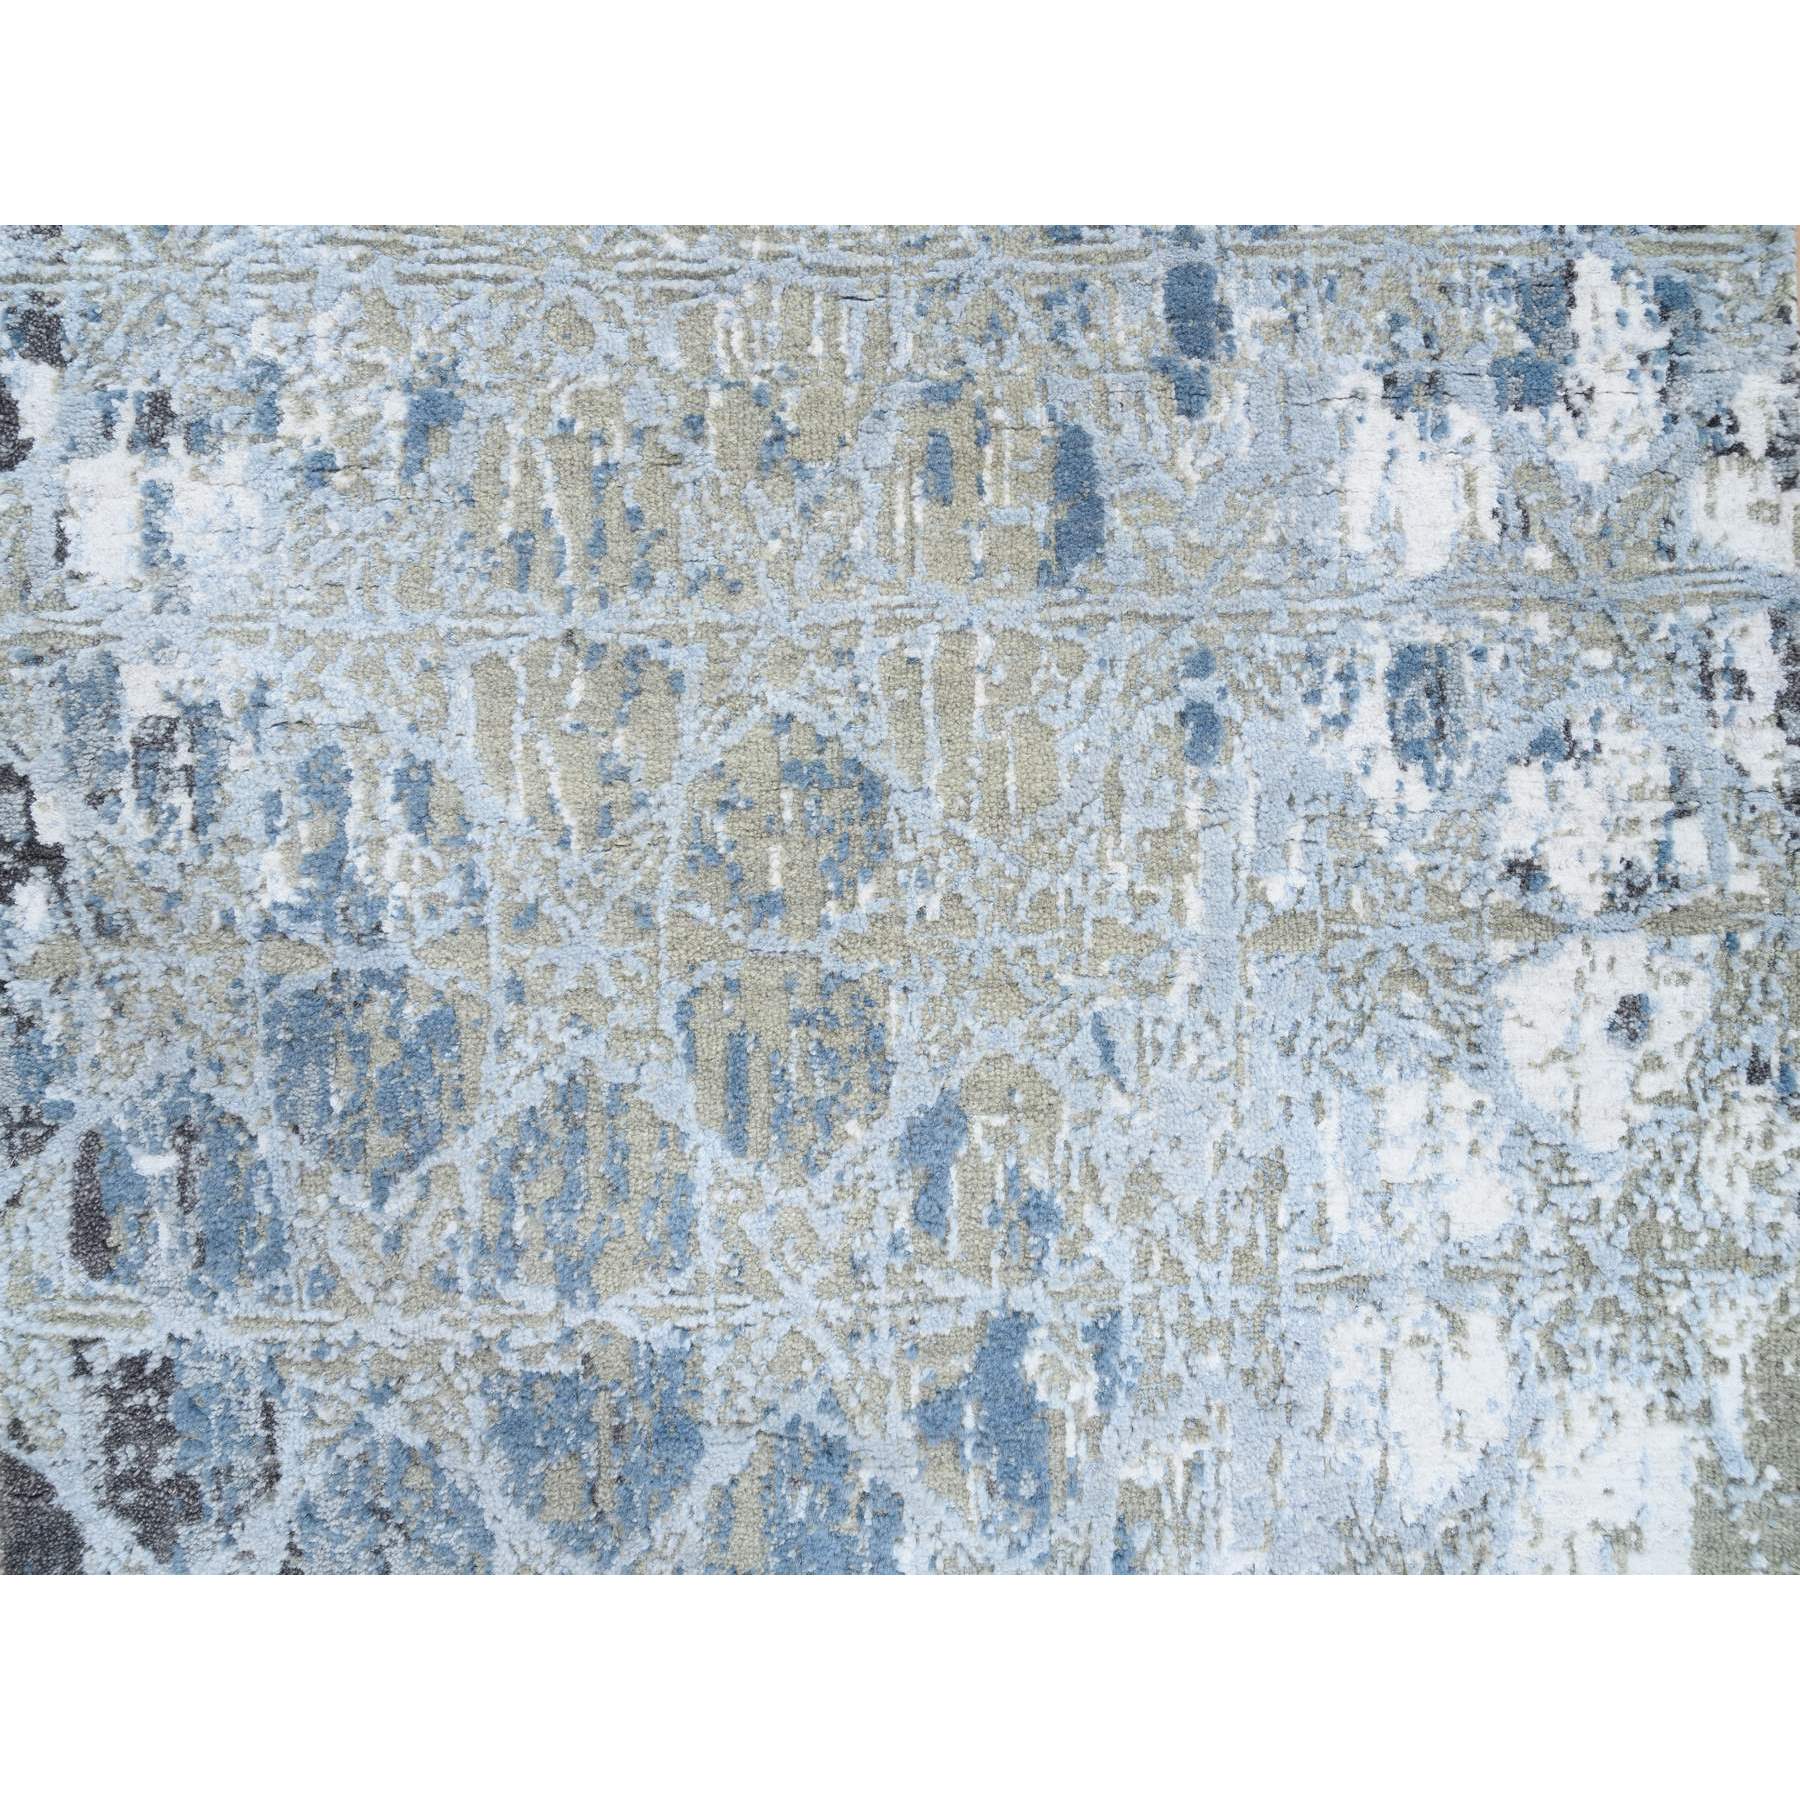 2'8"x5'10" Gray and Blue, Wool and Silk Hand Woven, THE HONEYCOMB Award Winning Design, Oriental Rug 